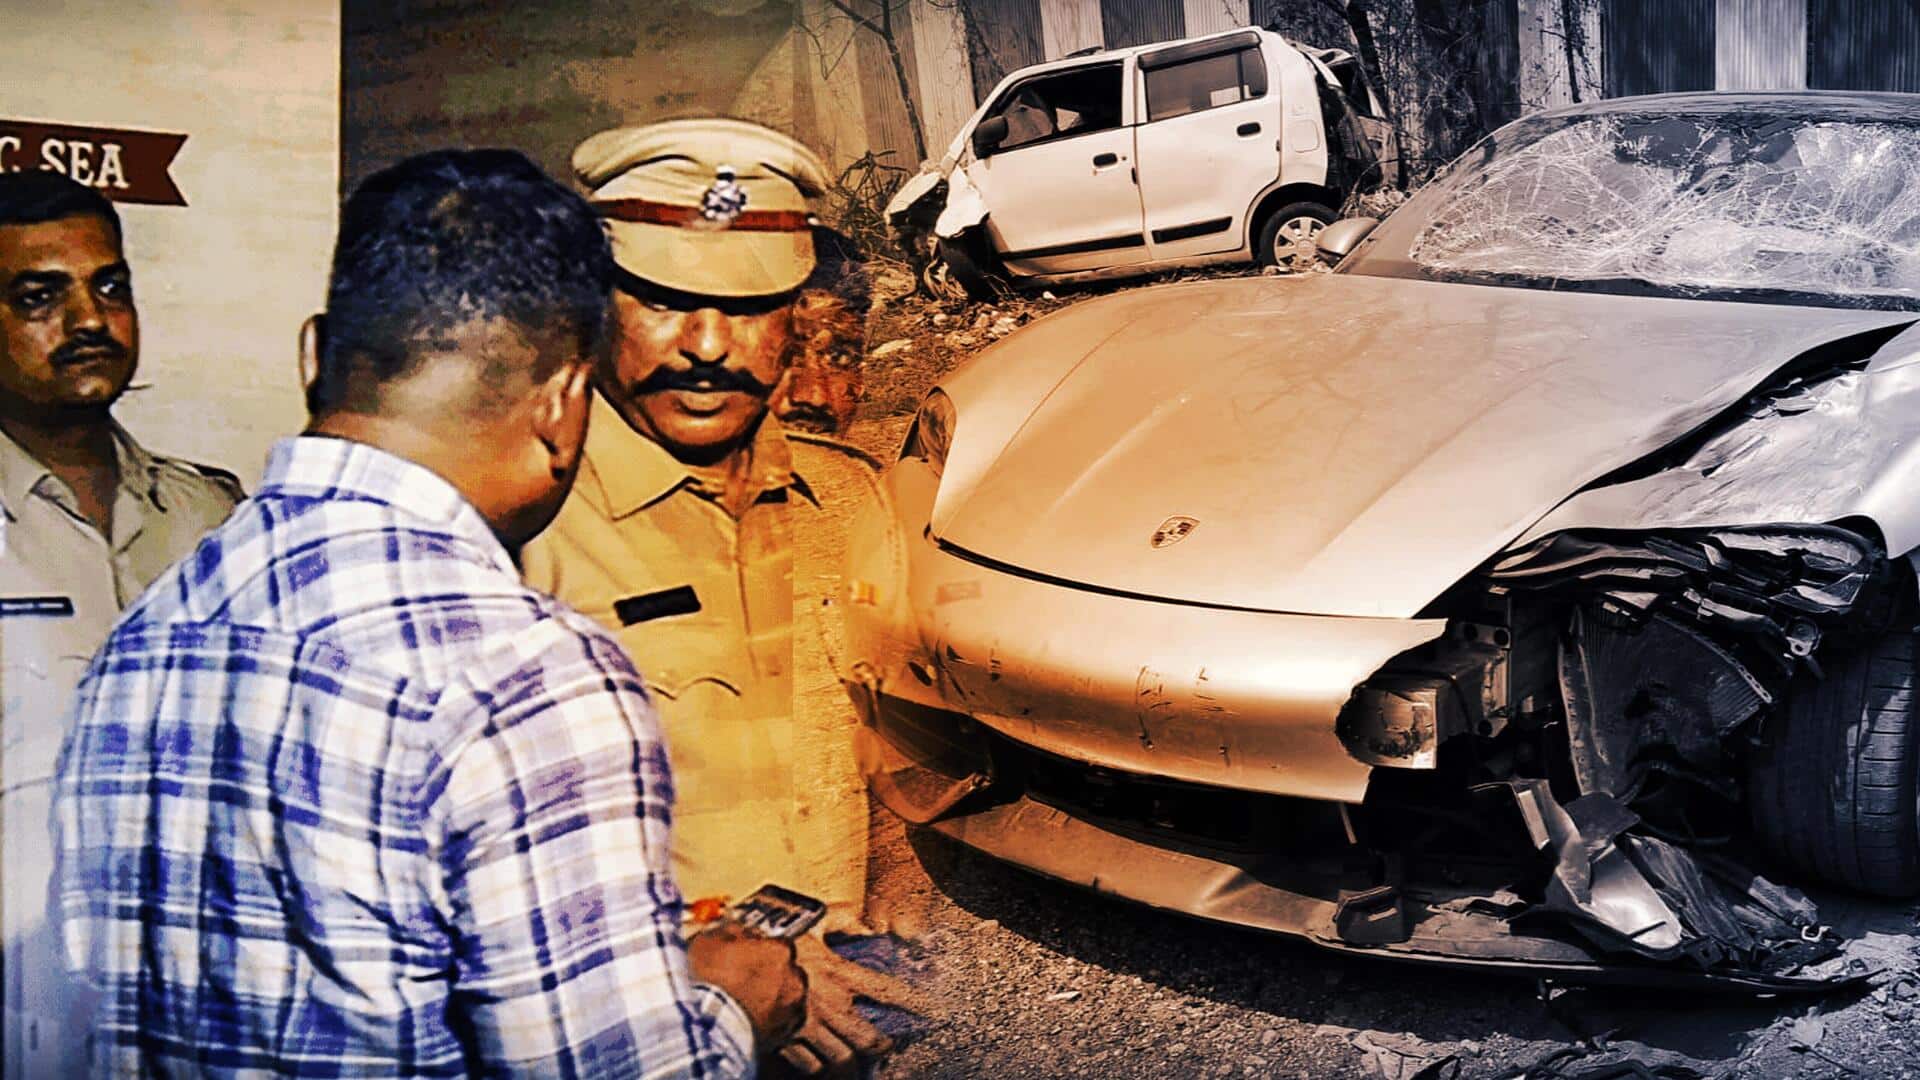 Pune Porsche accident: Accused teen's day plan at remand home 